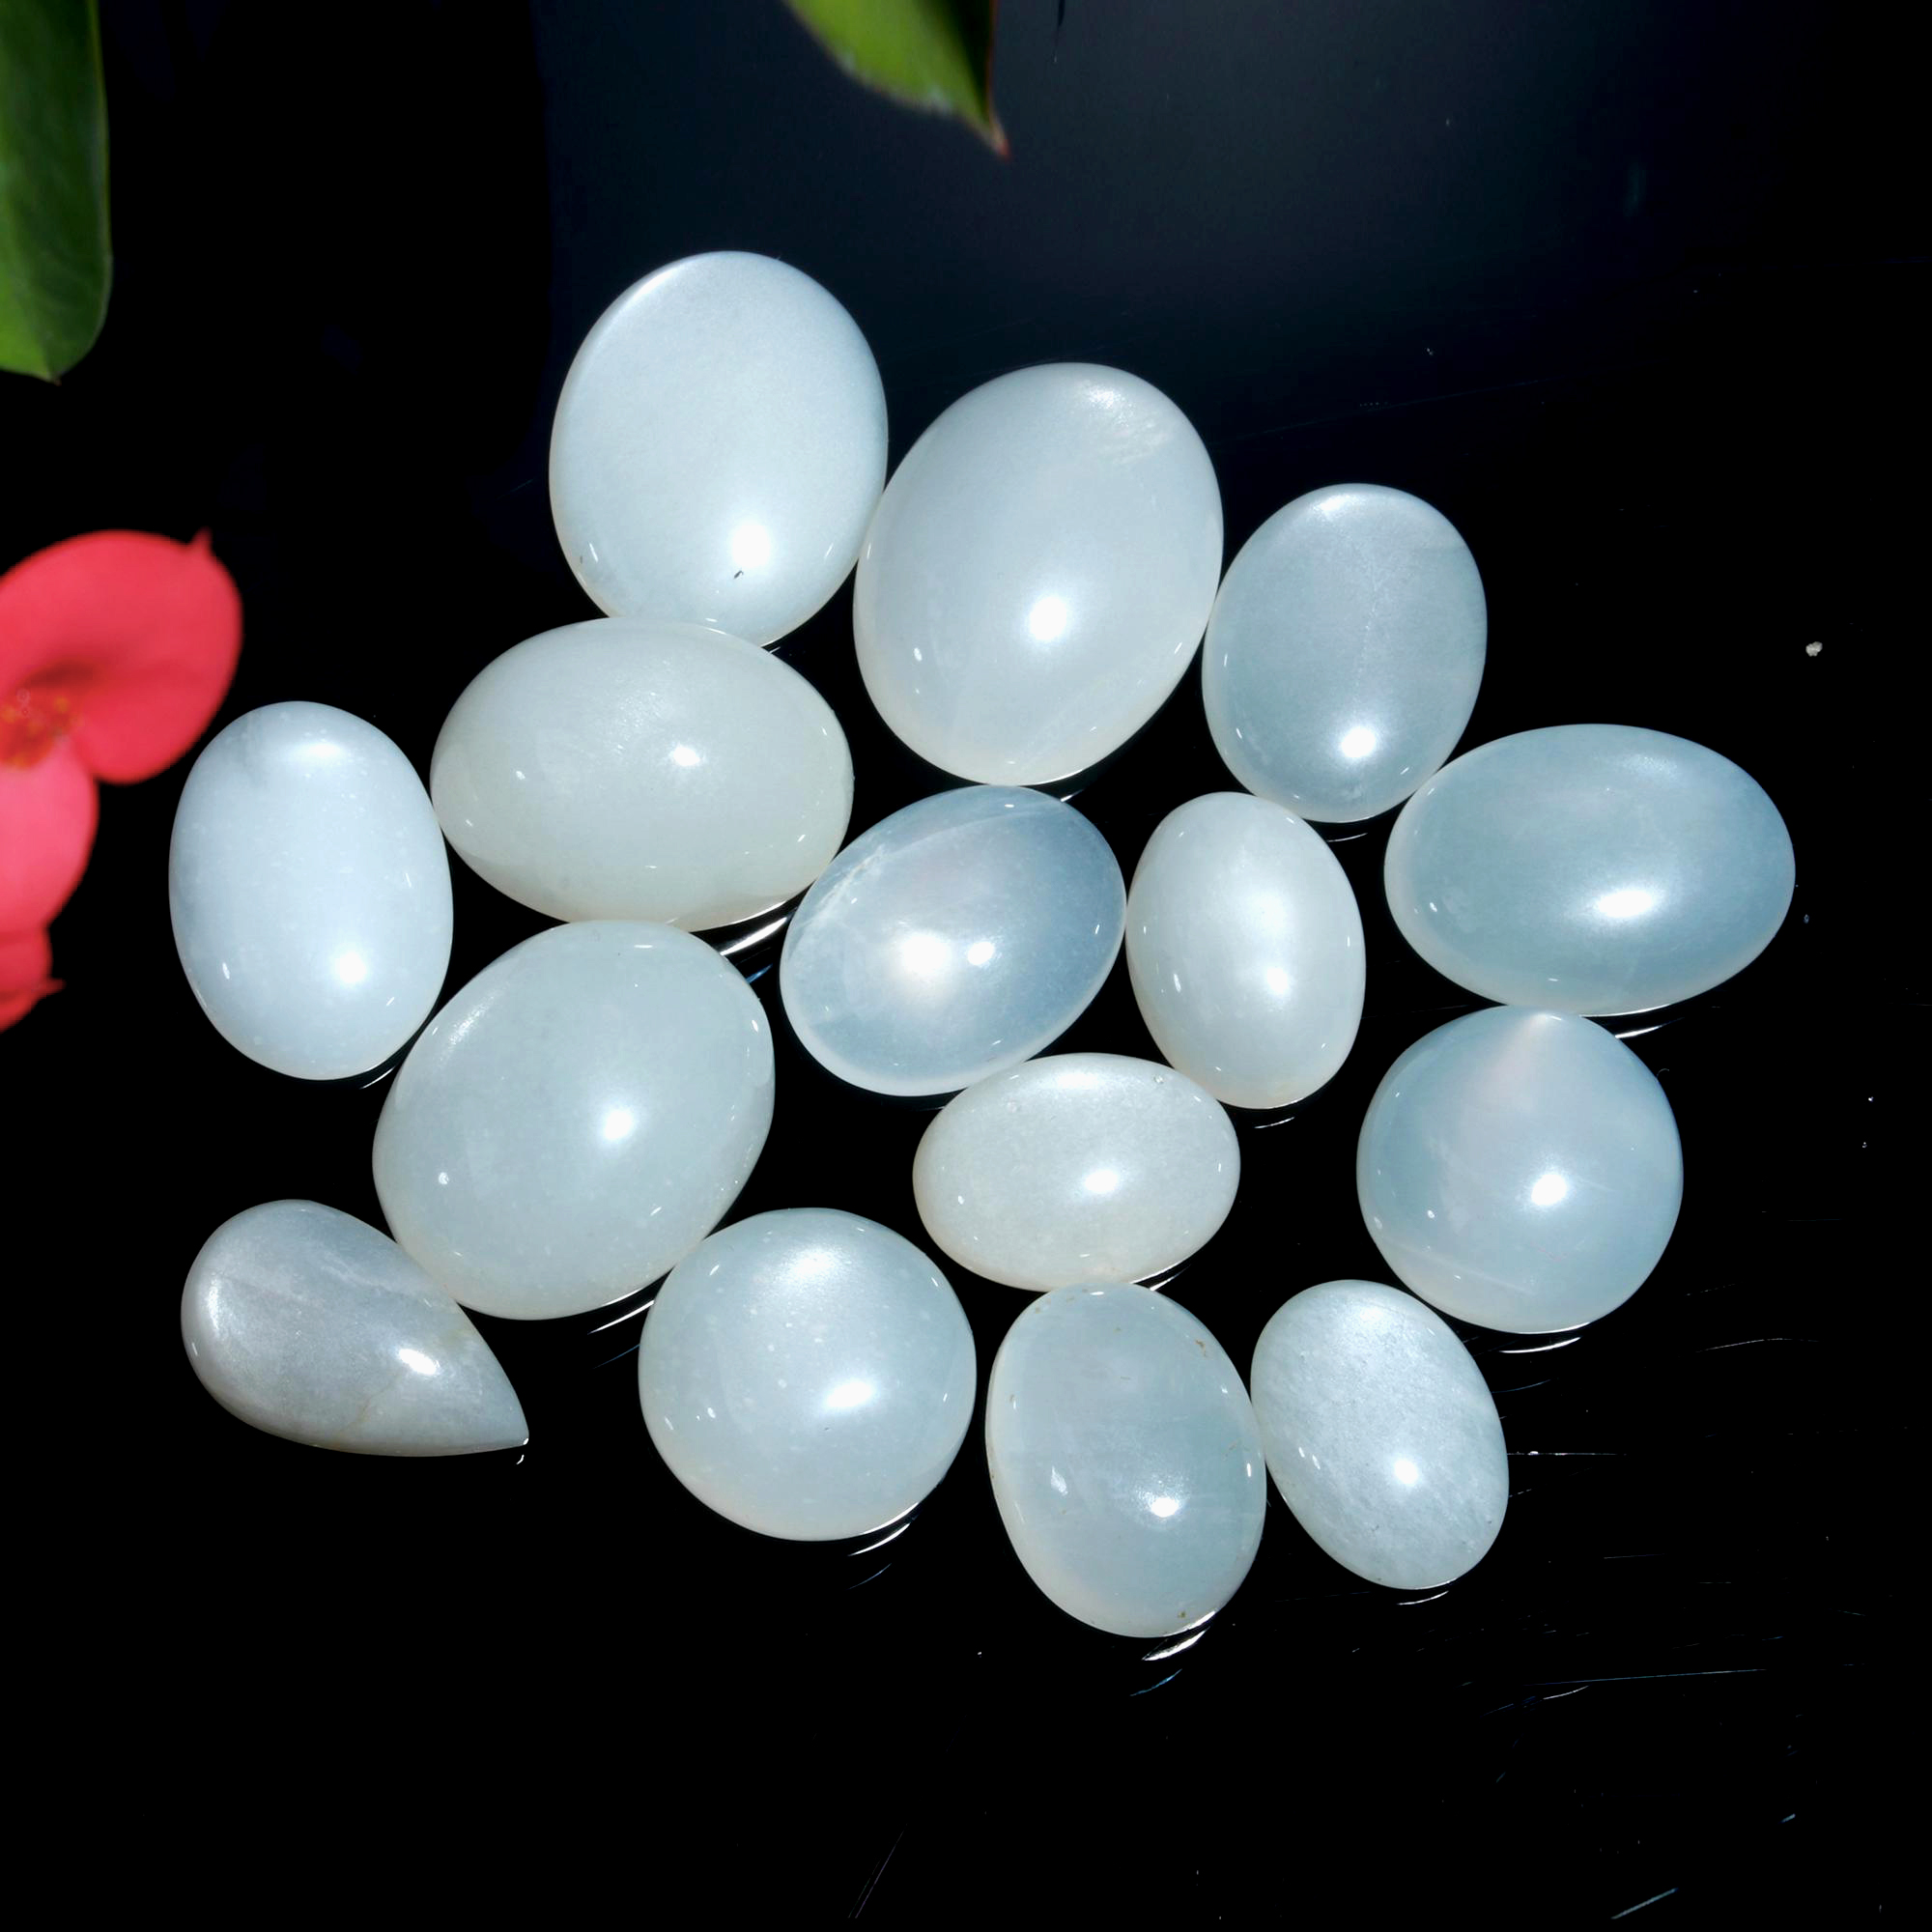 15 Pcs. 127Cts. Natural White Rainbow Moonstone polished Mix Cabochon Wholesale Loose Lot Size 20x15 14x10mm Gemstone for jewelry#1142